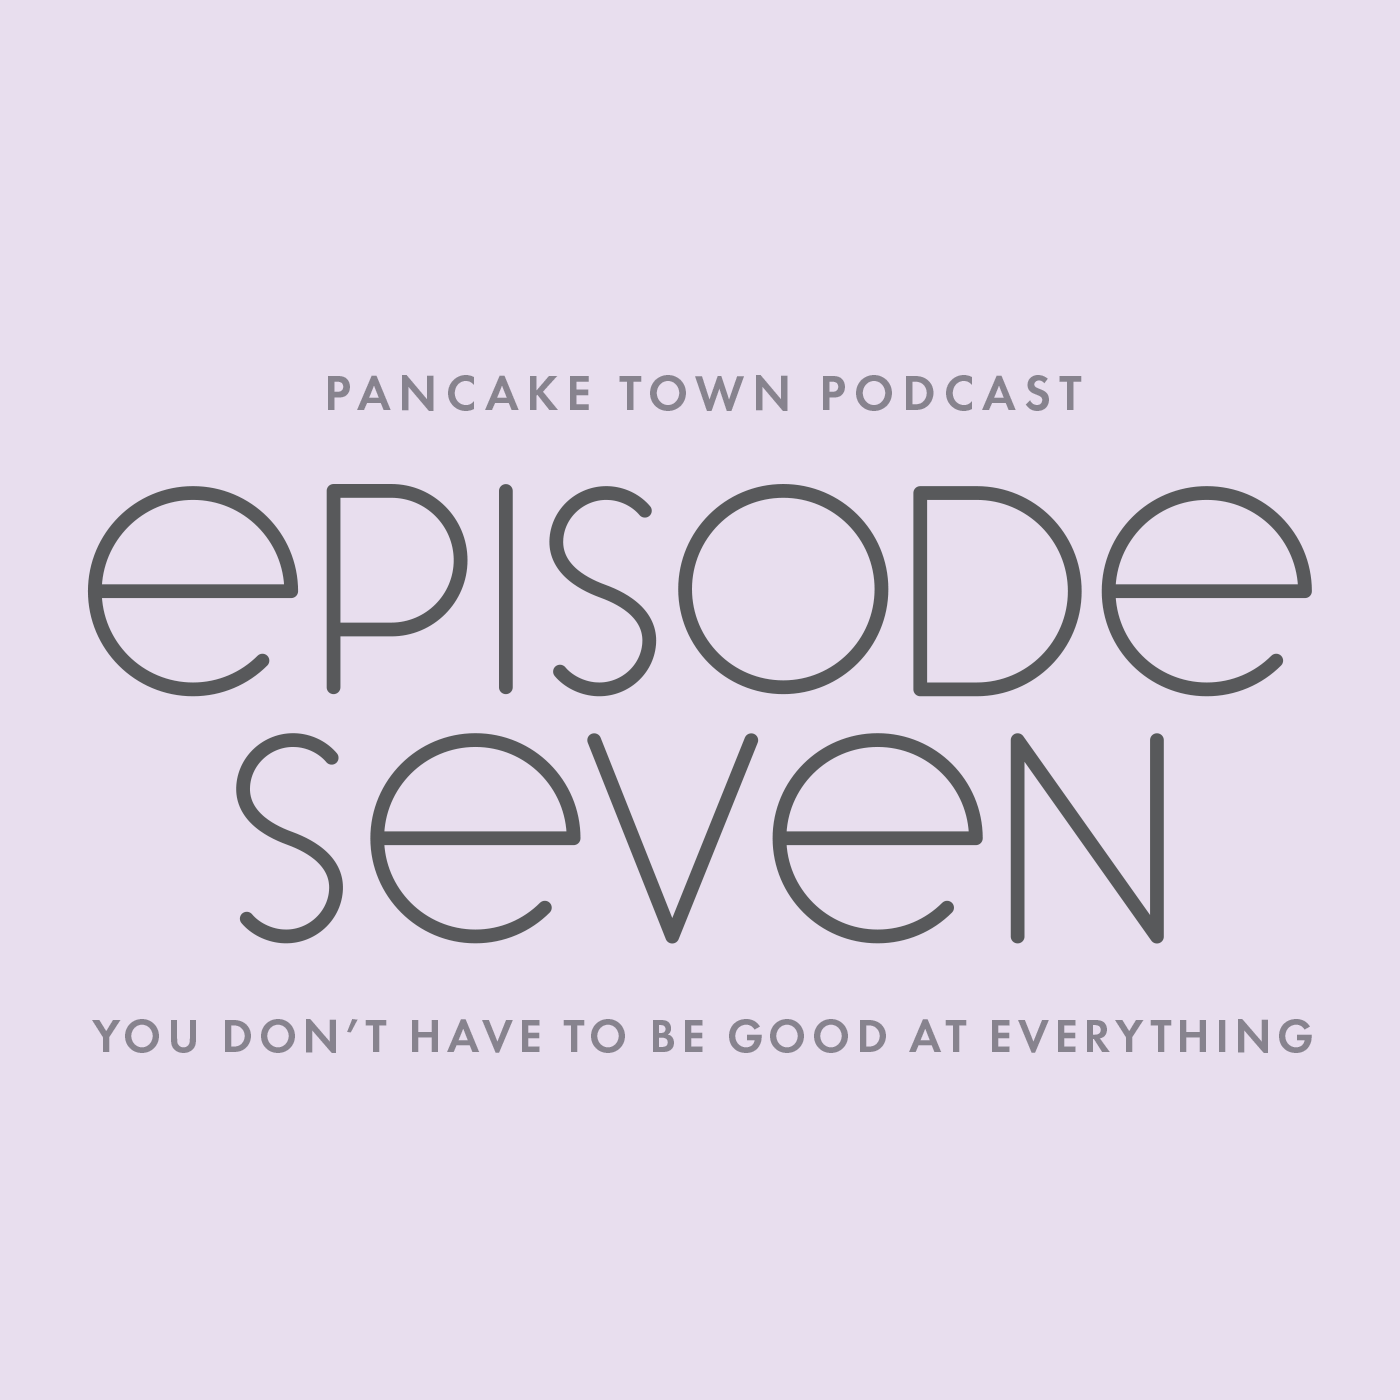 Episode 7 - You Don't Have to Be Good at Everything